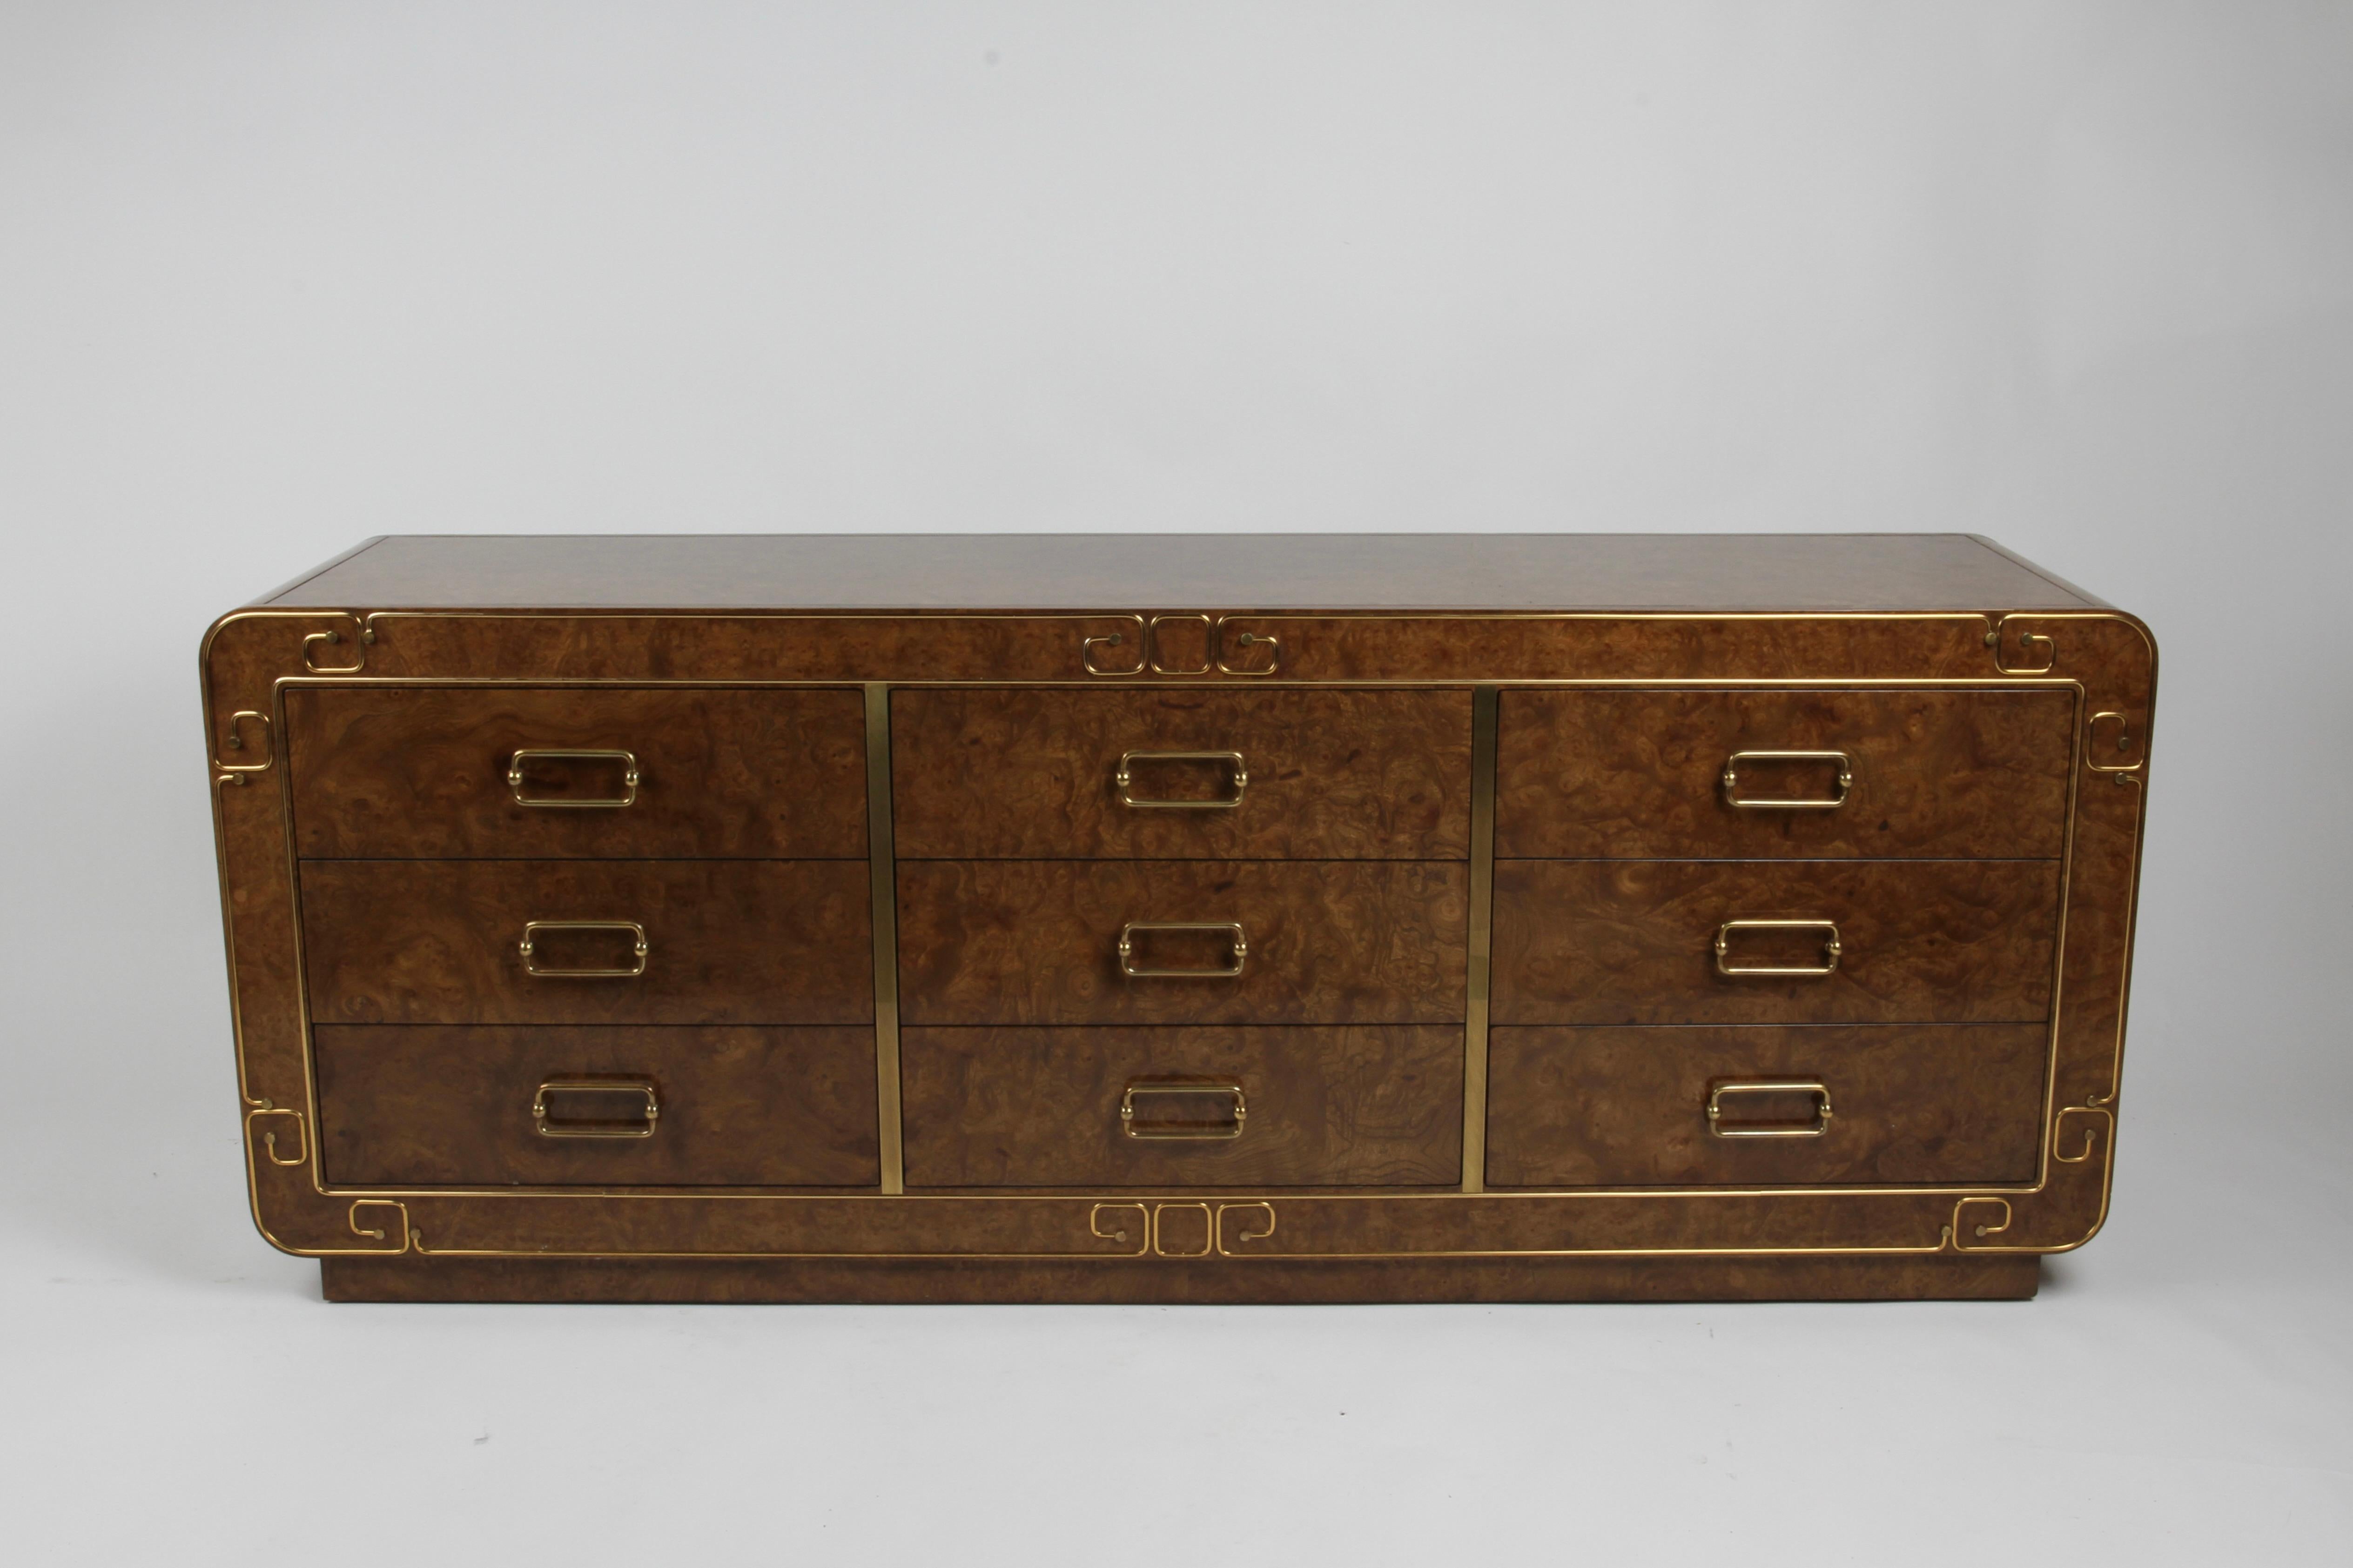 Impressive Mid-Century Modern or Hollywood Regency 1970s Mastercraft nine drawer dresser / sideboard in Burled Elm, with brass inlay, floats on plinth base. Drawers are dovetailed, custom brass handles and brass trim around front of case forms Greek